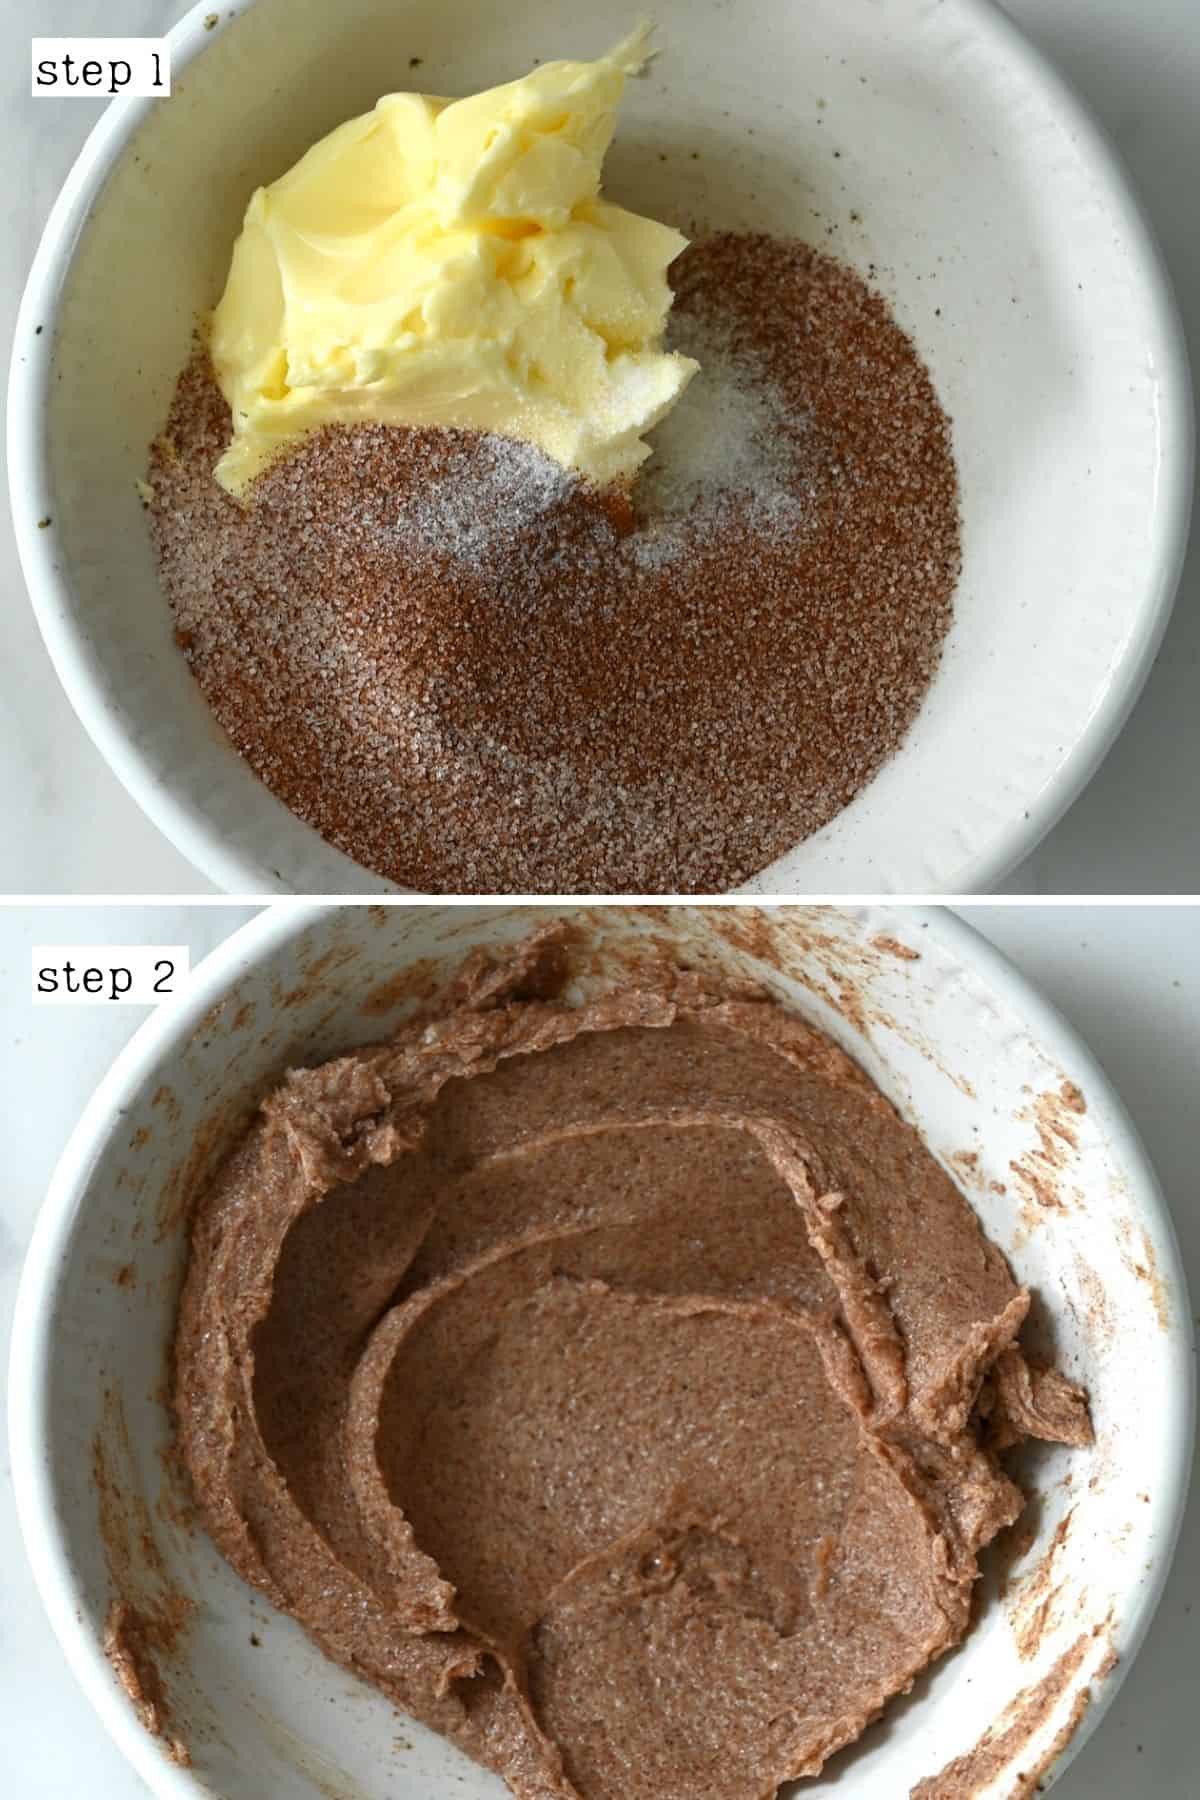 Steps for mixing cinnamon sugar and butter